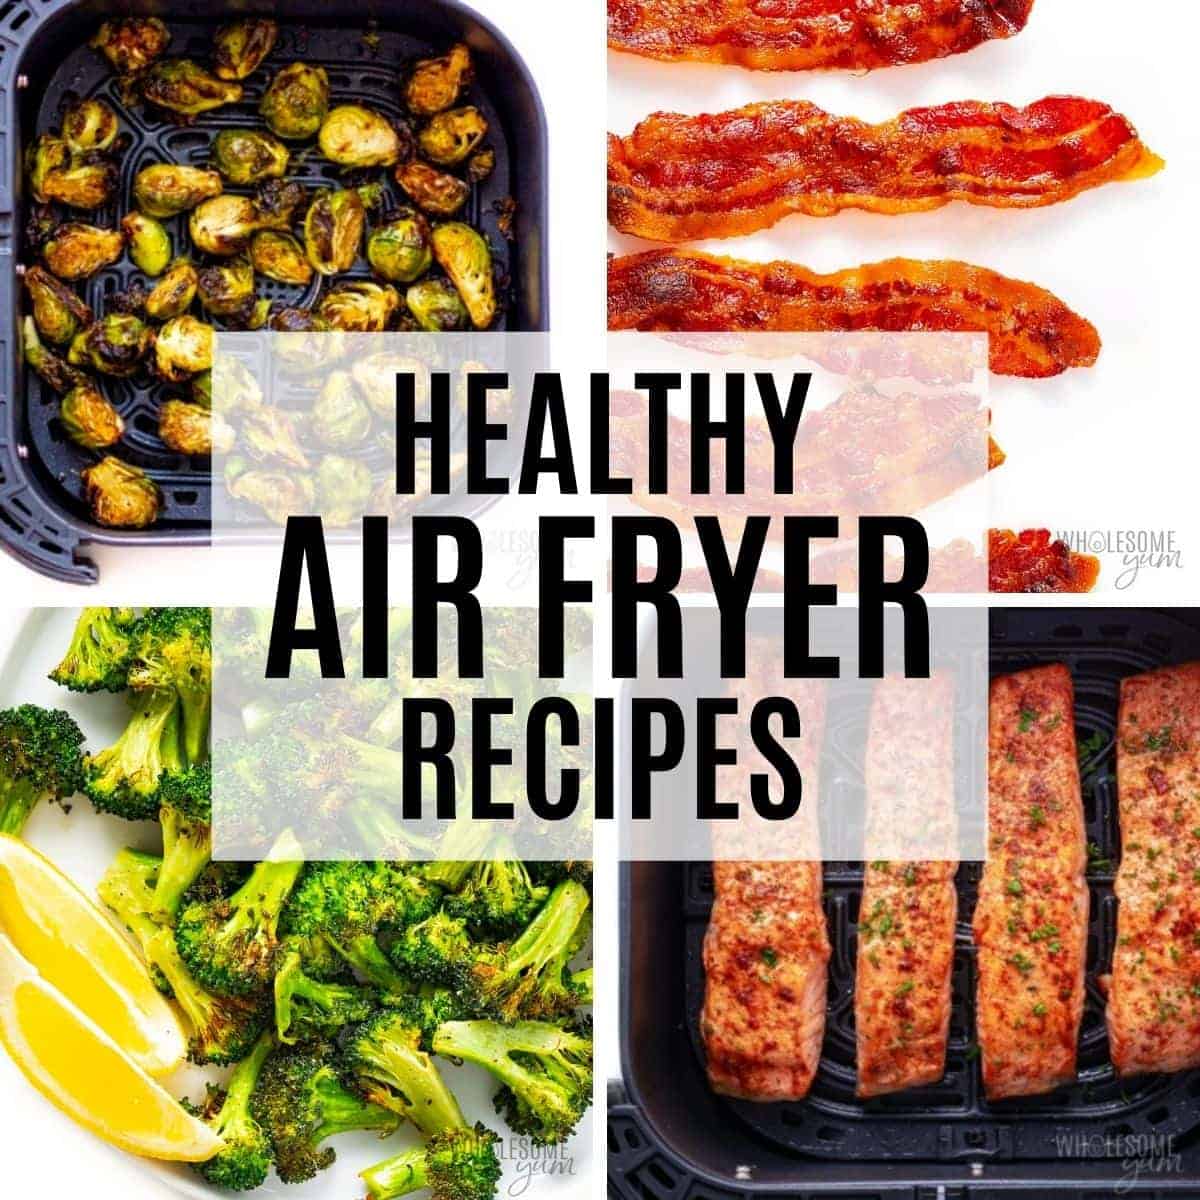 https://www.wholesomeyum.com/wp-content/uploads/2022/03/Large-Prep-Air-Fryer-Recipes-Taxonomy-Header-Collage.jpg